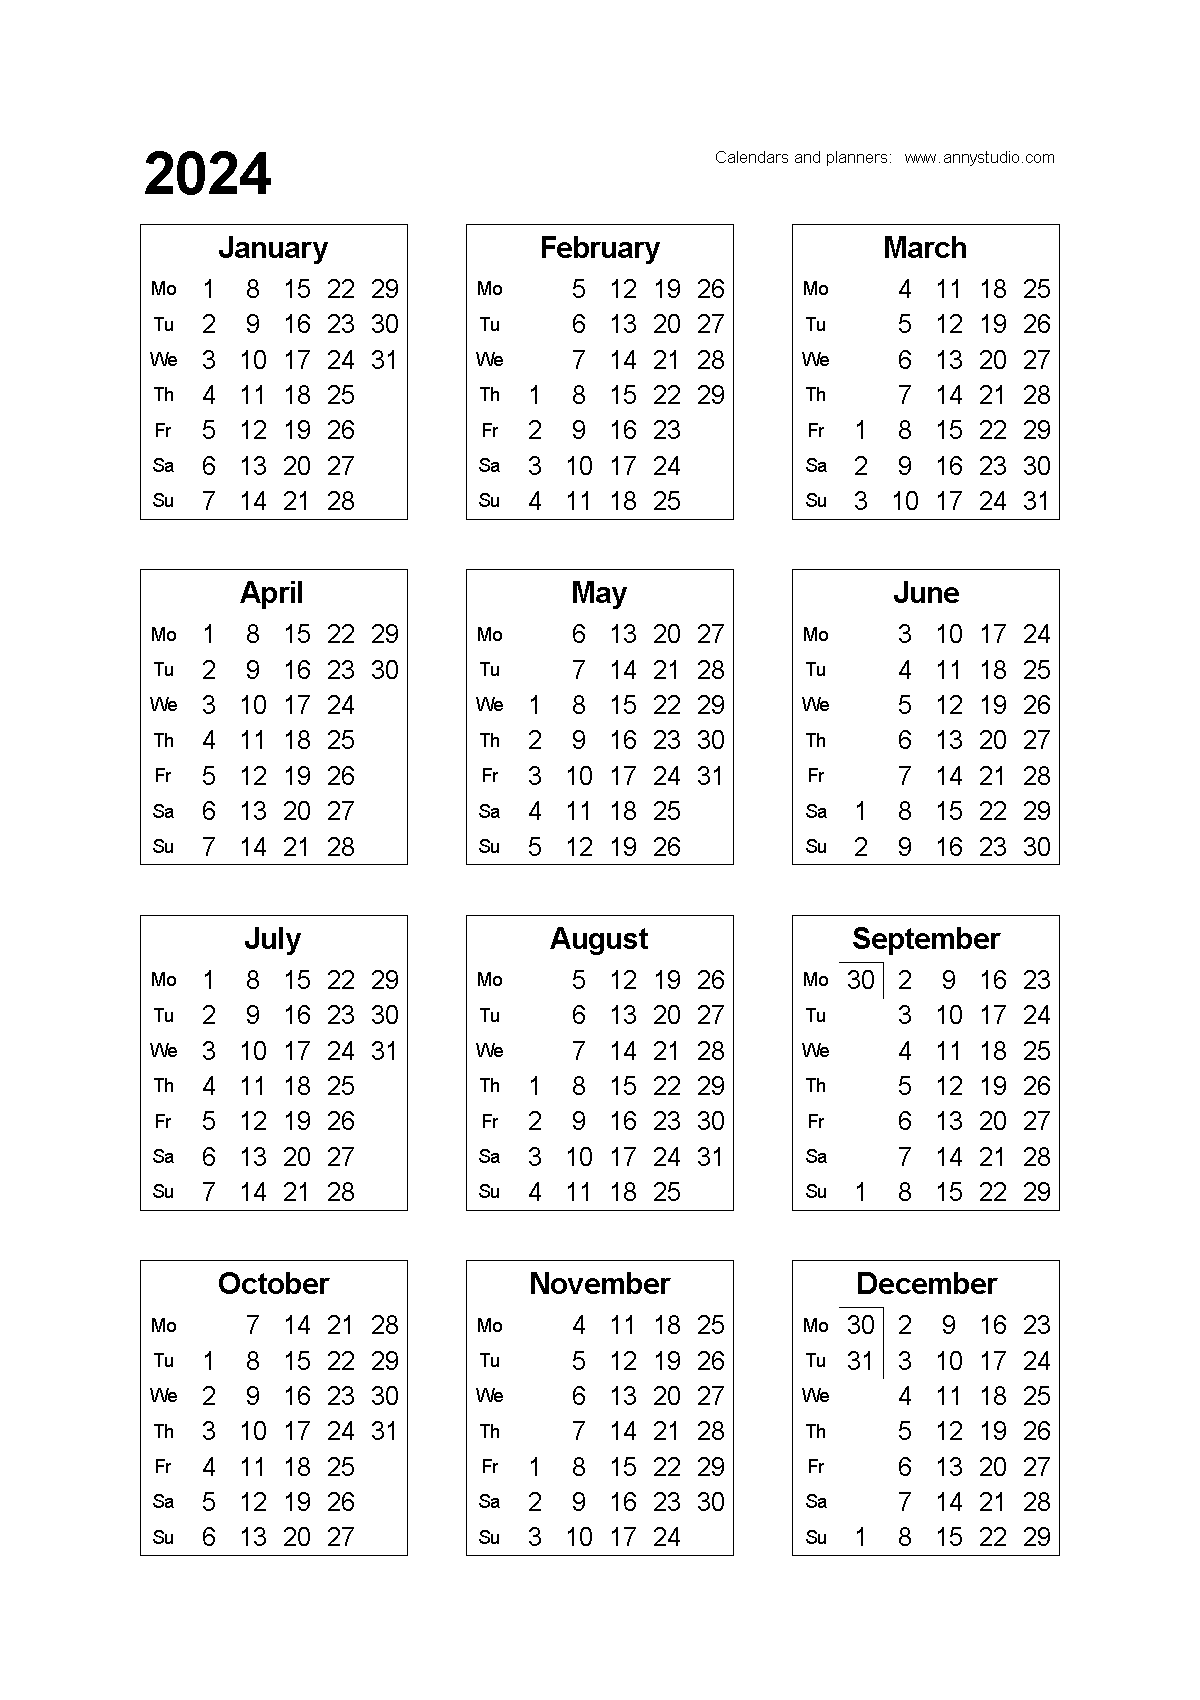 Free Printable Calendars And Planners 2024, 2025 And 2026 regarding Free Printable Calendar 2024 Ireland